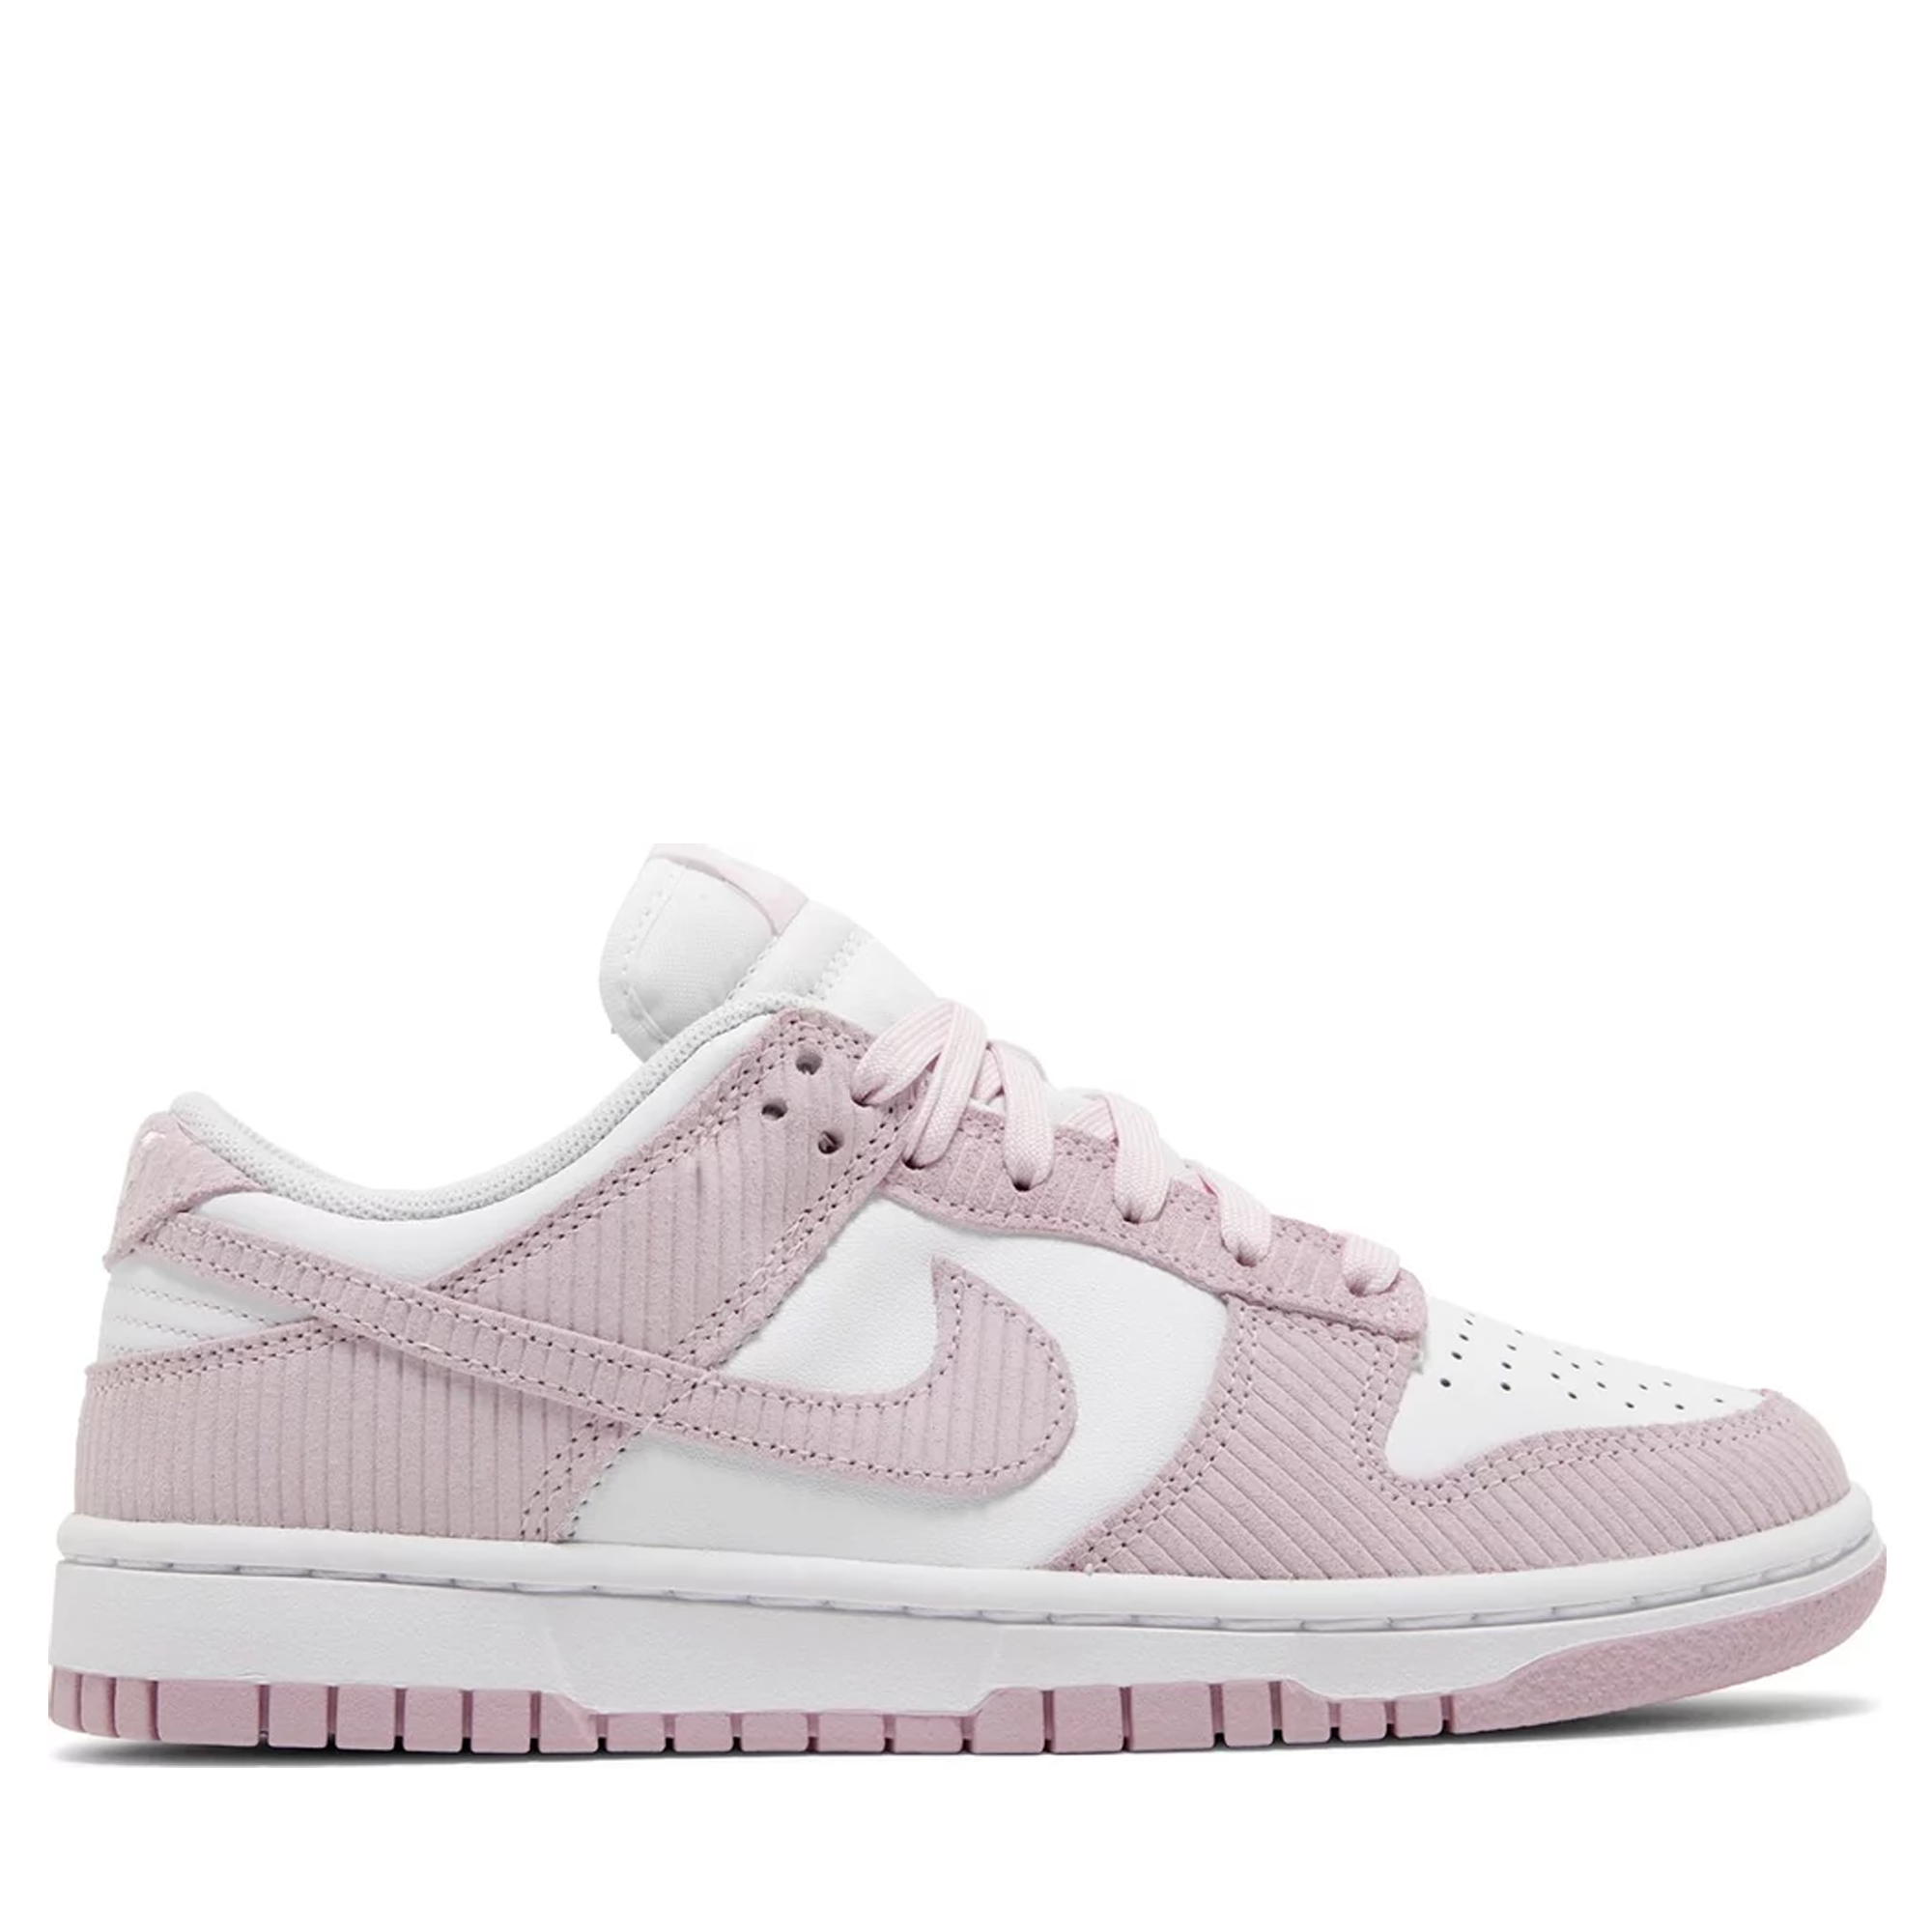 Shop Nike Dunks Sneakers in Canada